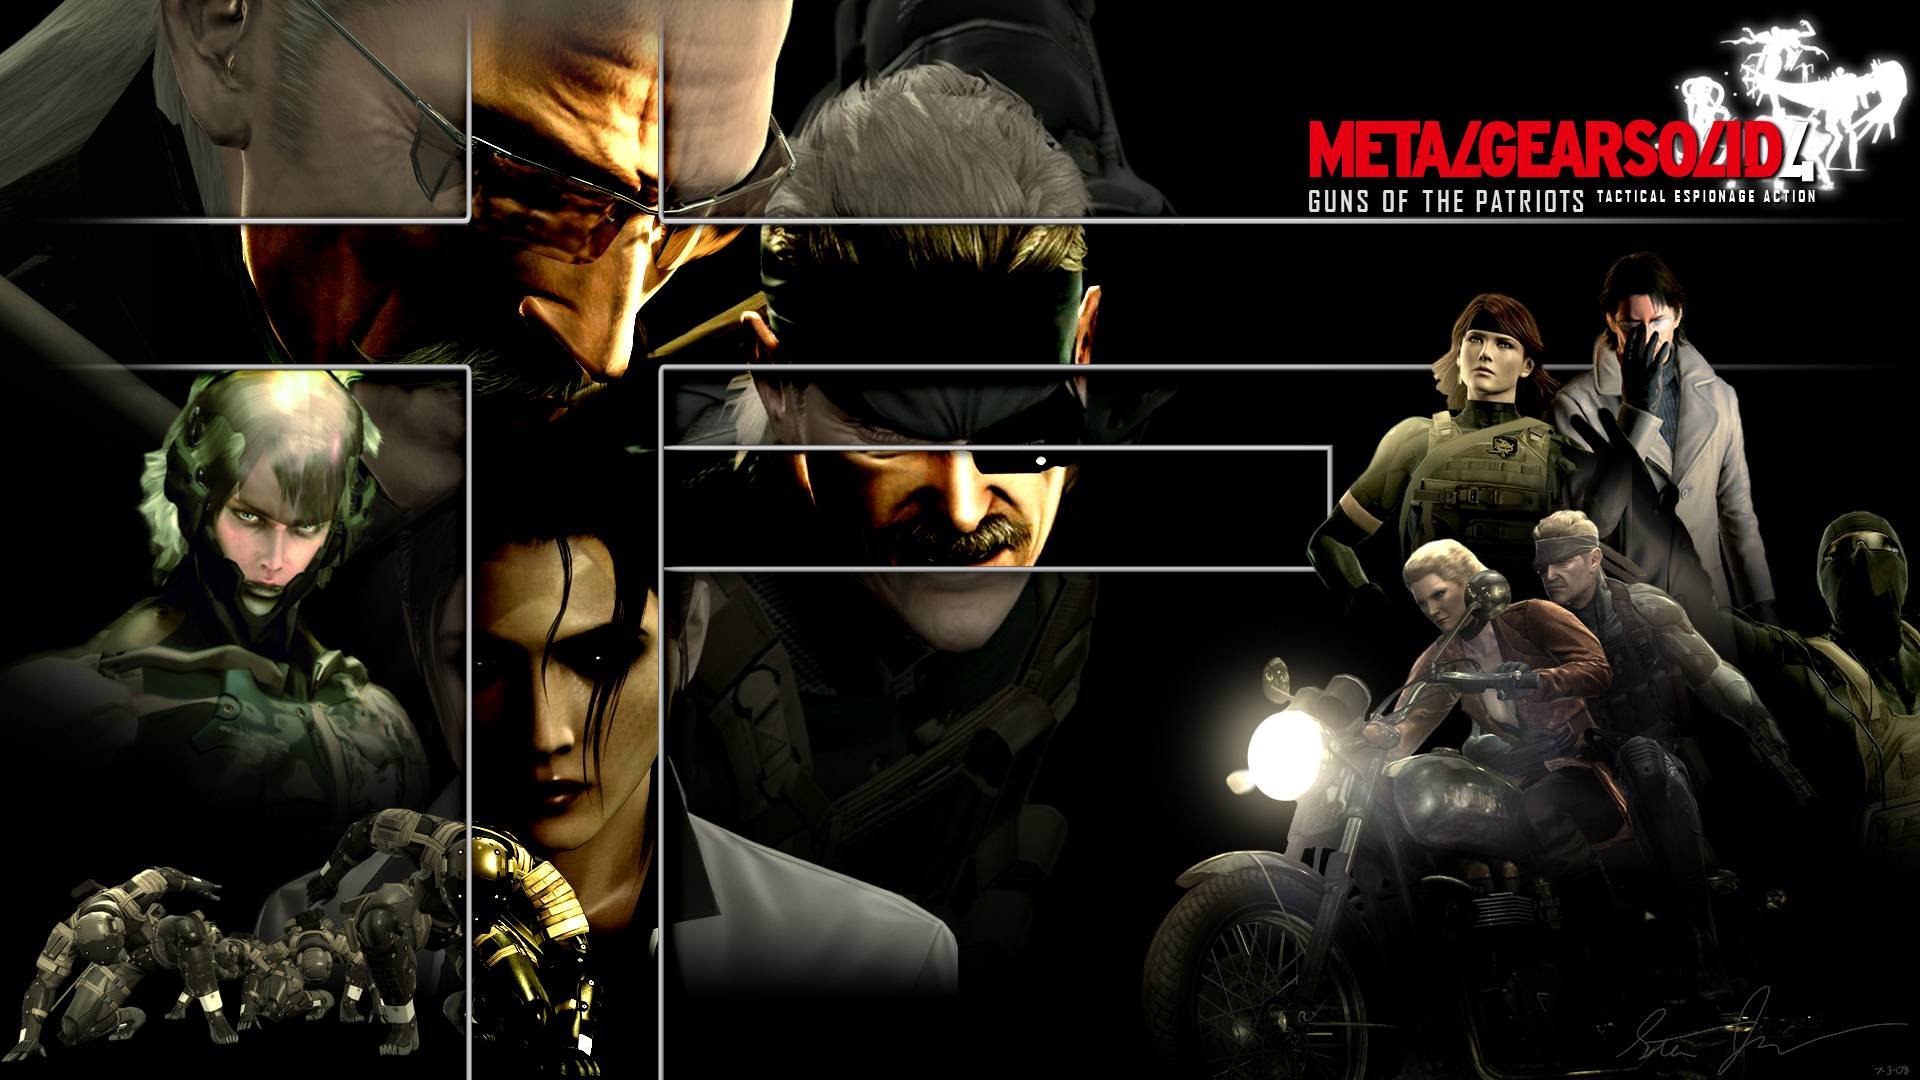 Best Metal Gear Solid 4: Guns Of The Patriots (MGS 4) background ID:419883 for High Resolution full hd 1920x1080 desktop